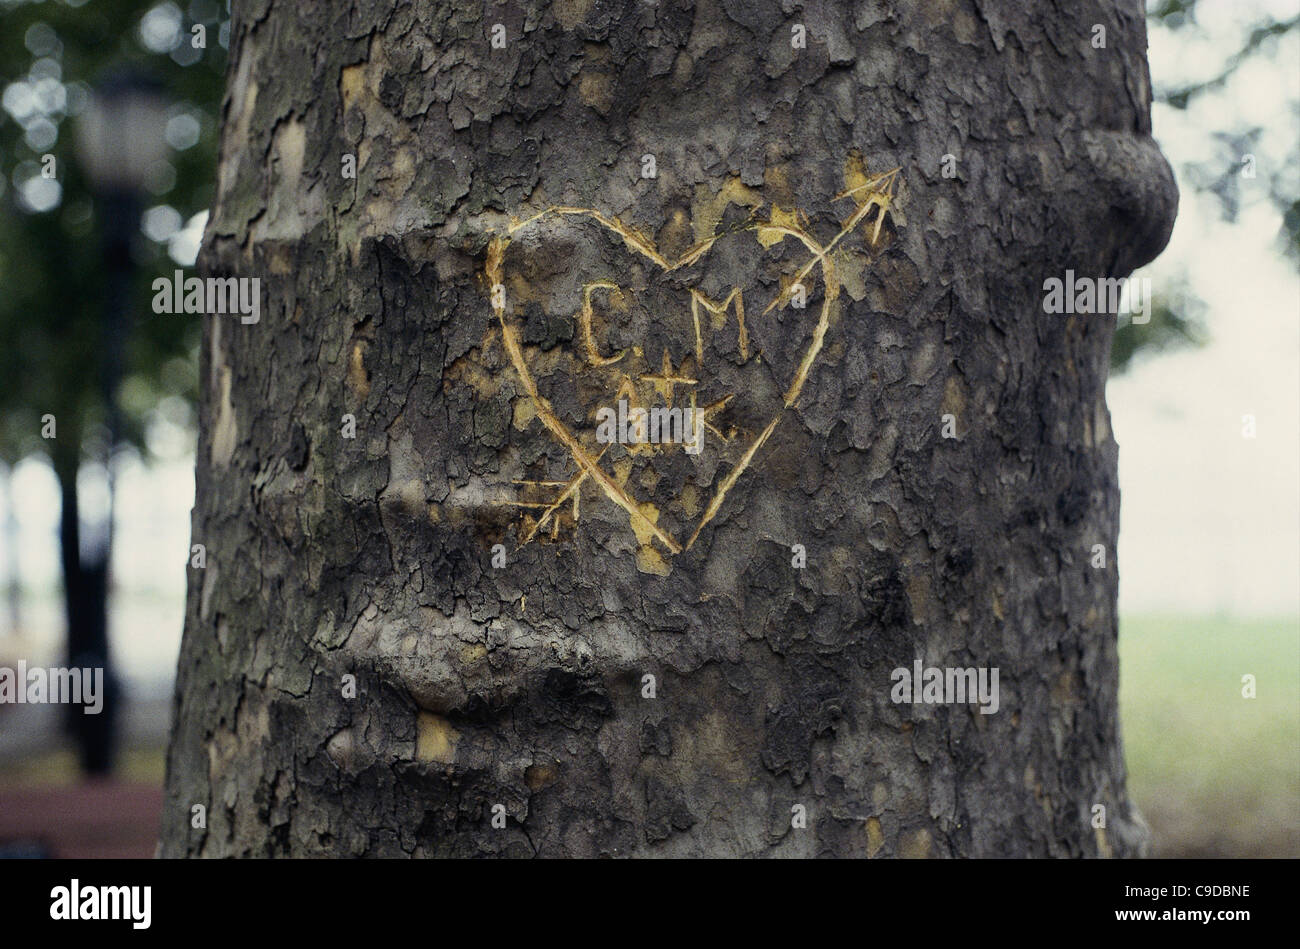 Close-up of a heart carved on a tree trunk Stock Photo